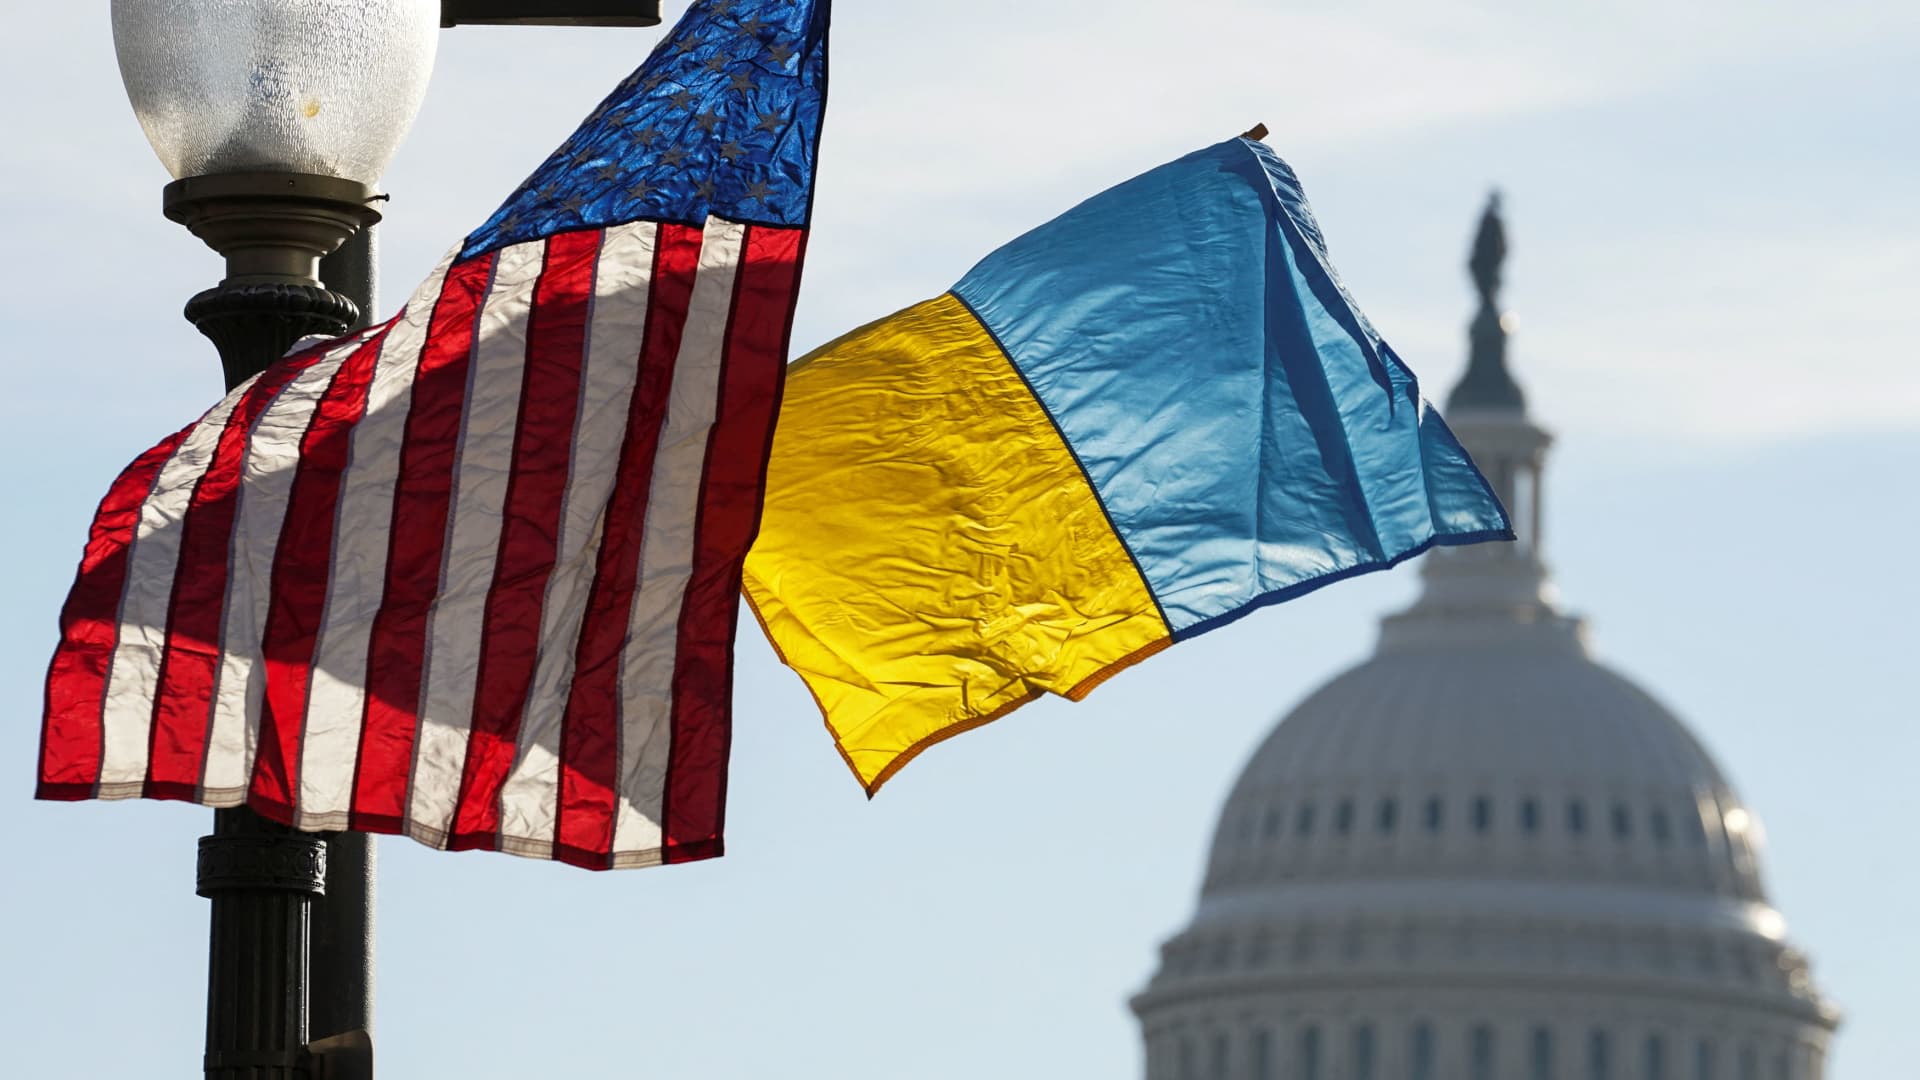 Ukrainian and U.S. flags are flown along Pennsylvania Avenue leading to the U.S. Capitol ahead of a visit by Ukraine's President Volodymyr Zelenskyy for talks with U.S. President Joe Biden and an address to a joint meeting of Congress in Washington, U.S., December 21, 2022. 